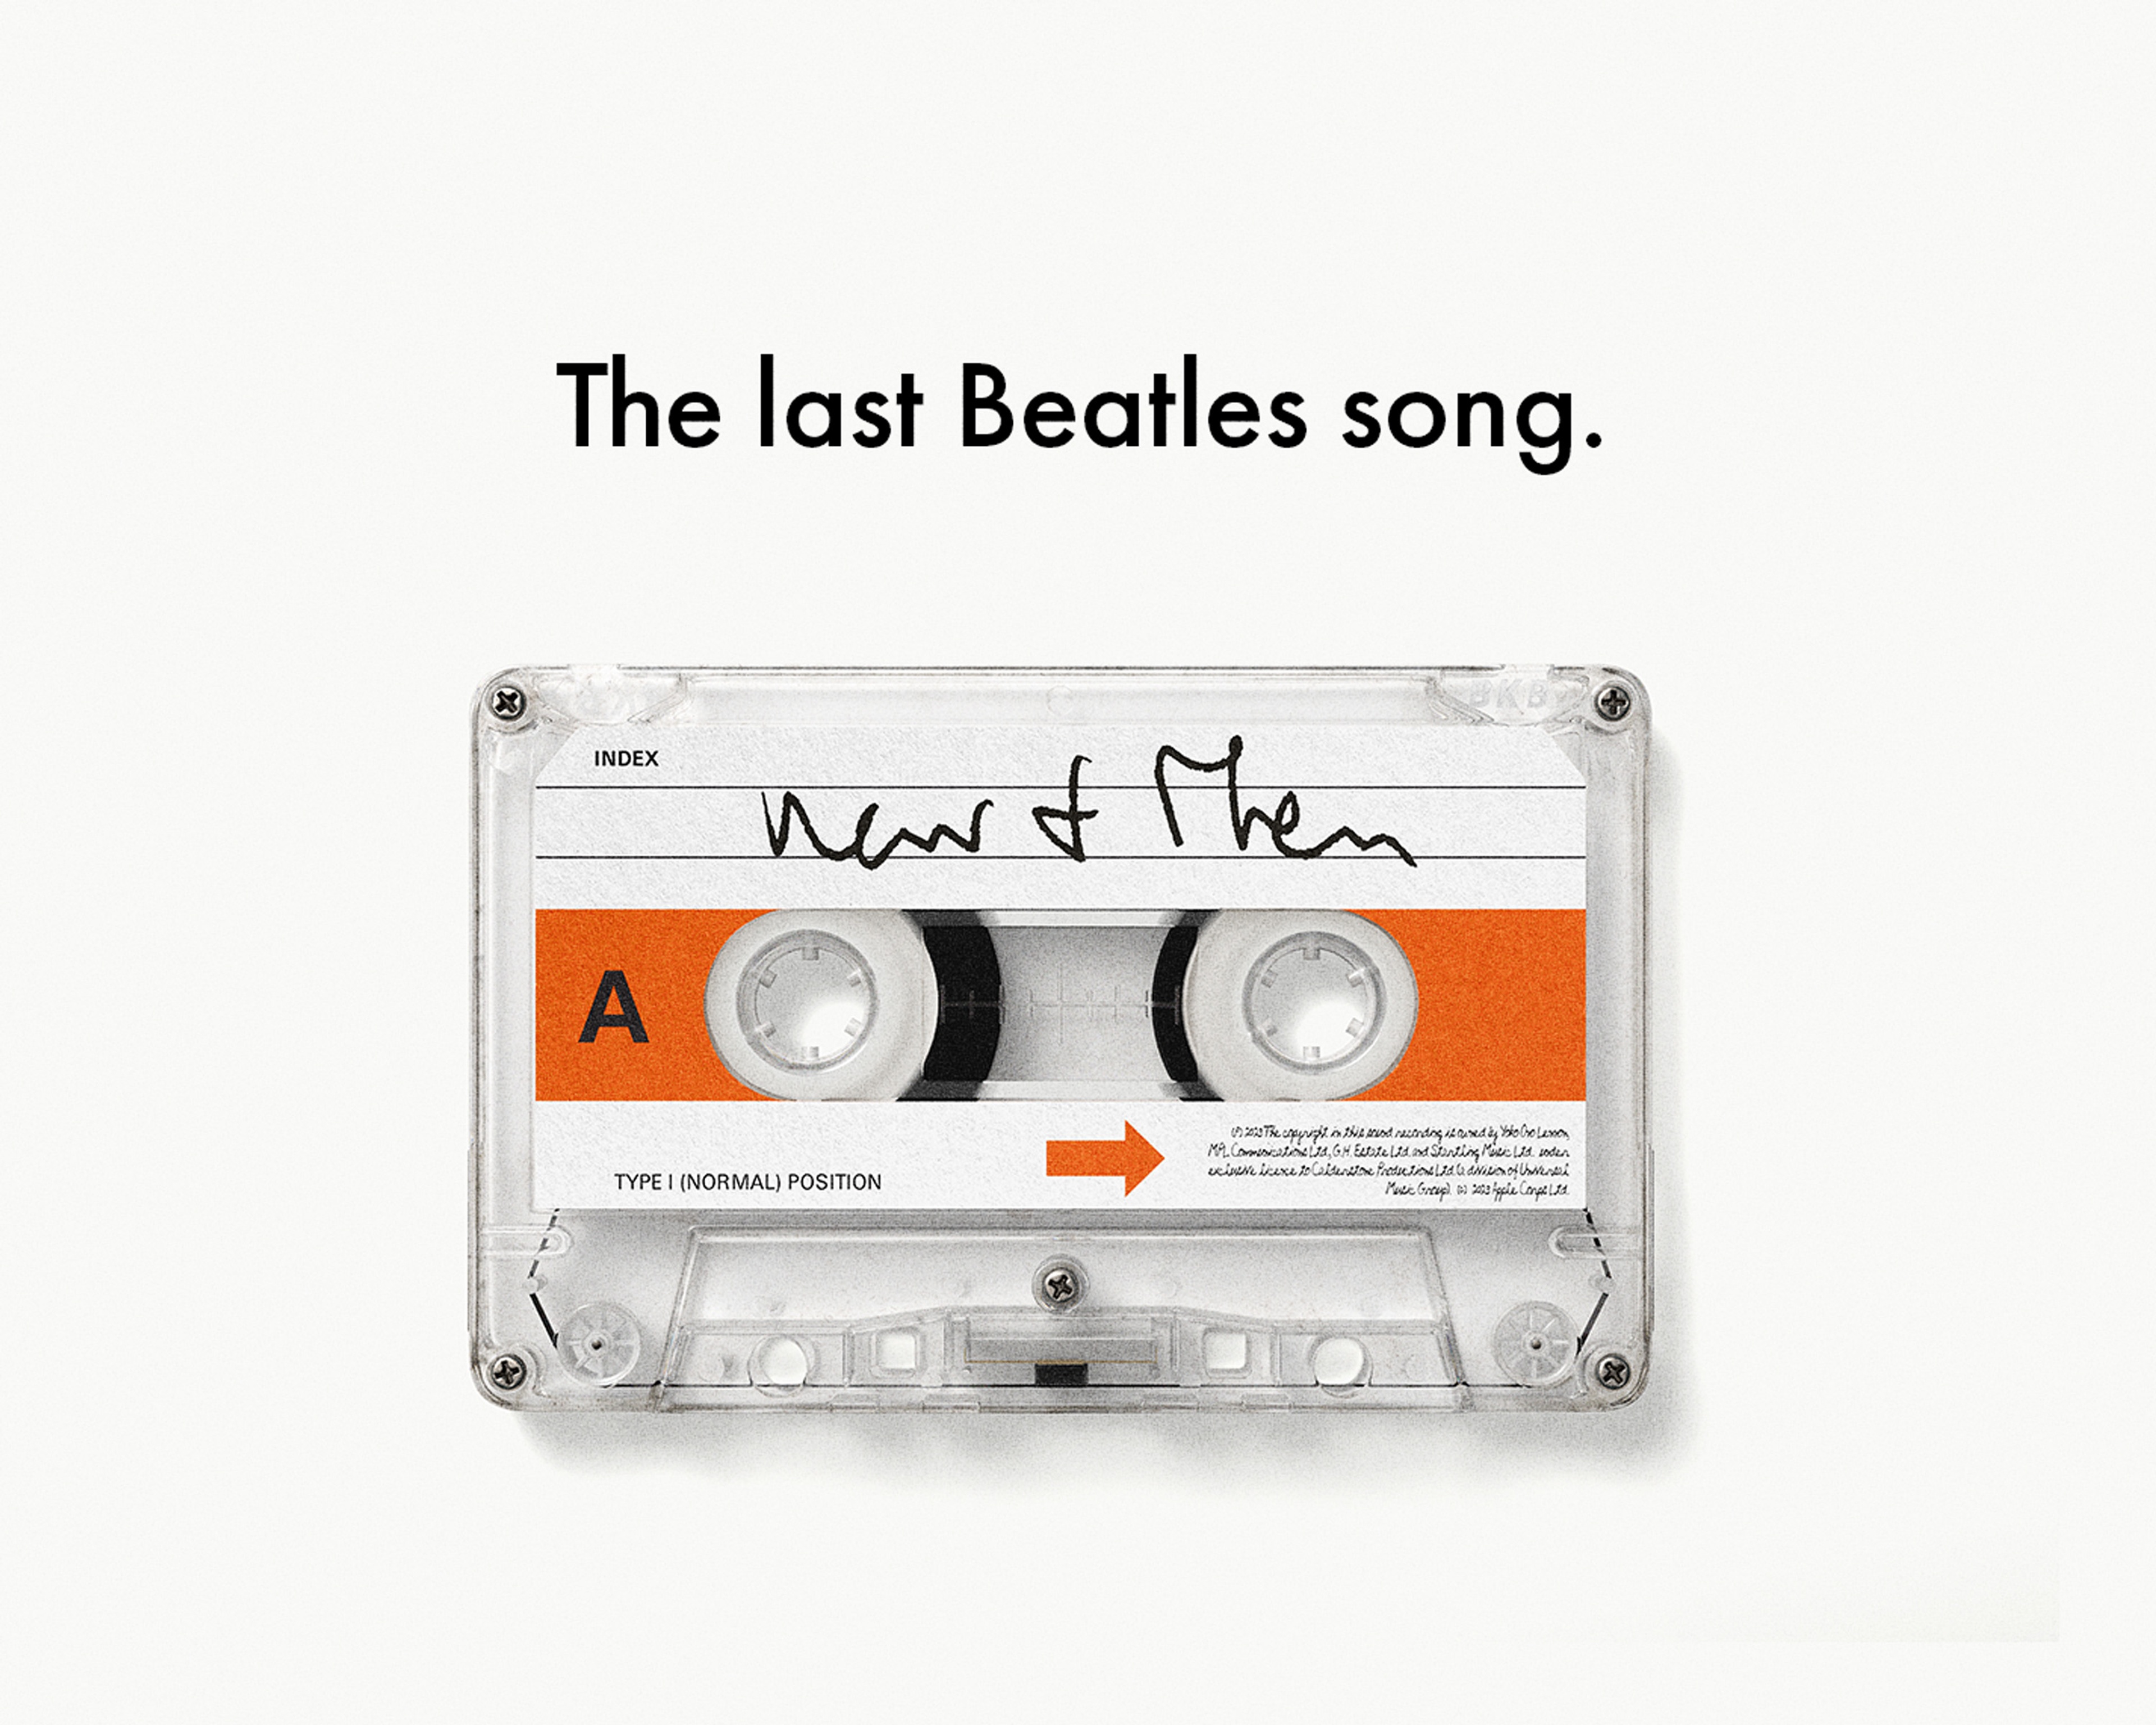 Graphic image of clear cassette tape with orange band featuring handwritten text saying 'Now and Then'  and the text "The last Beatles song." above the cassette tape.